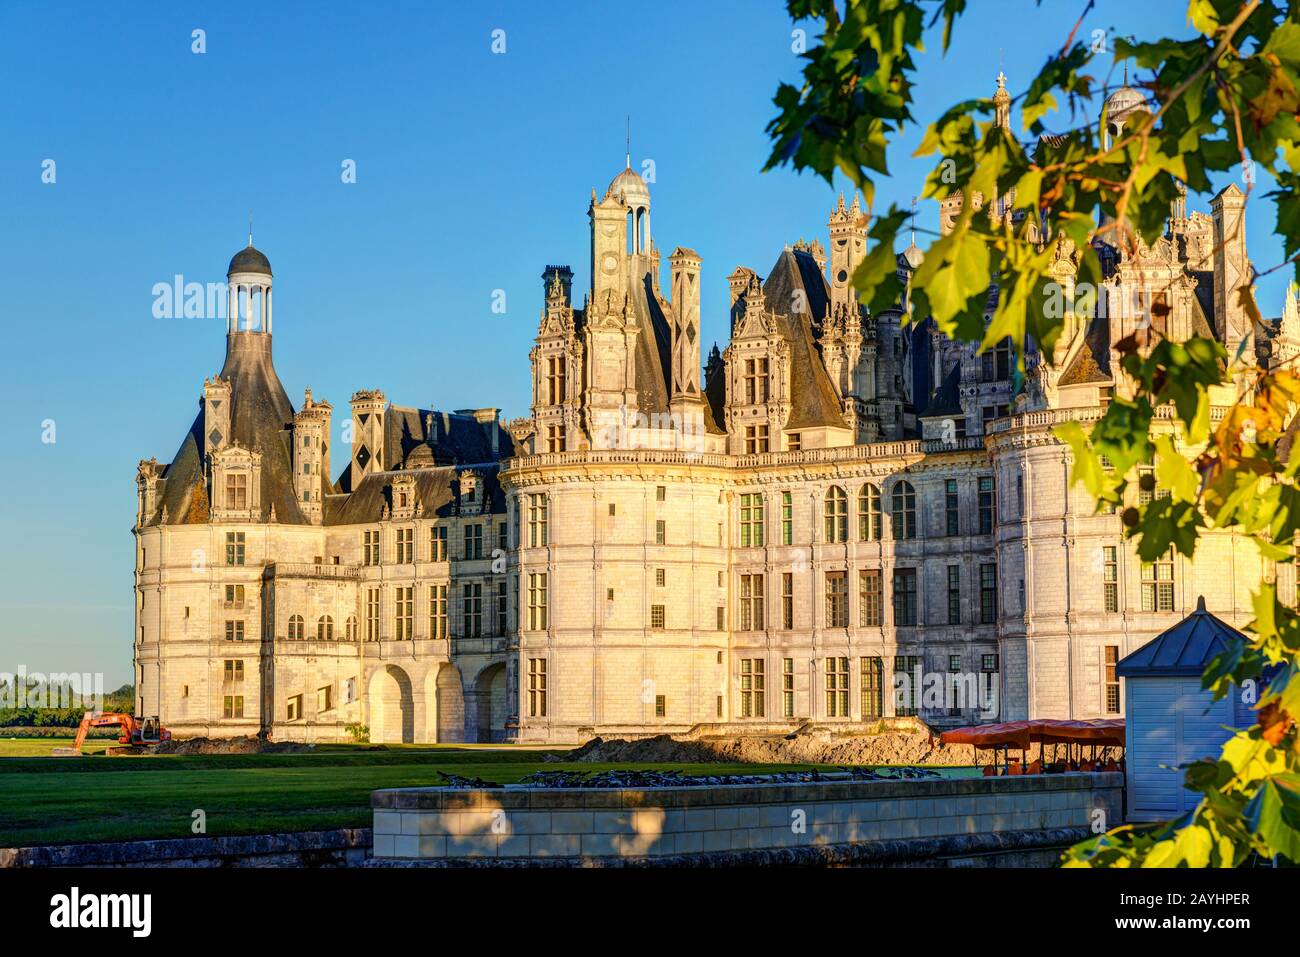 The royal Chateau de Chambord, France. This castle is located in the Loire Valley, was built in the 16th century and is one of the most recognizable c Stock Photo